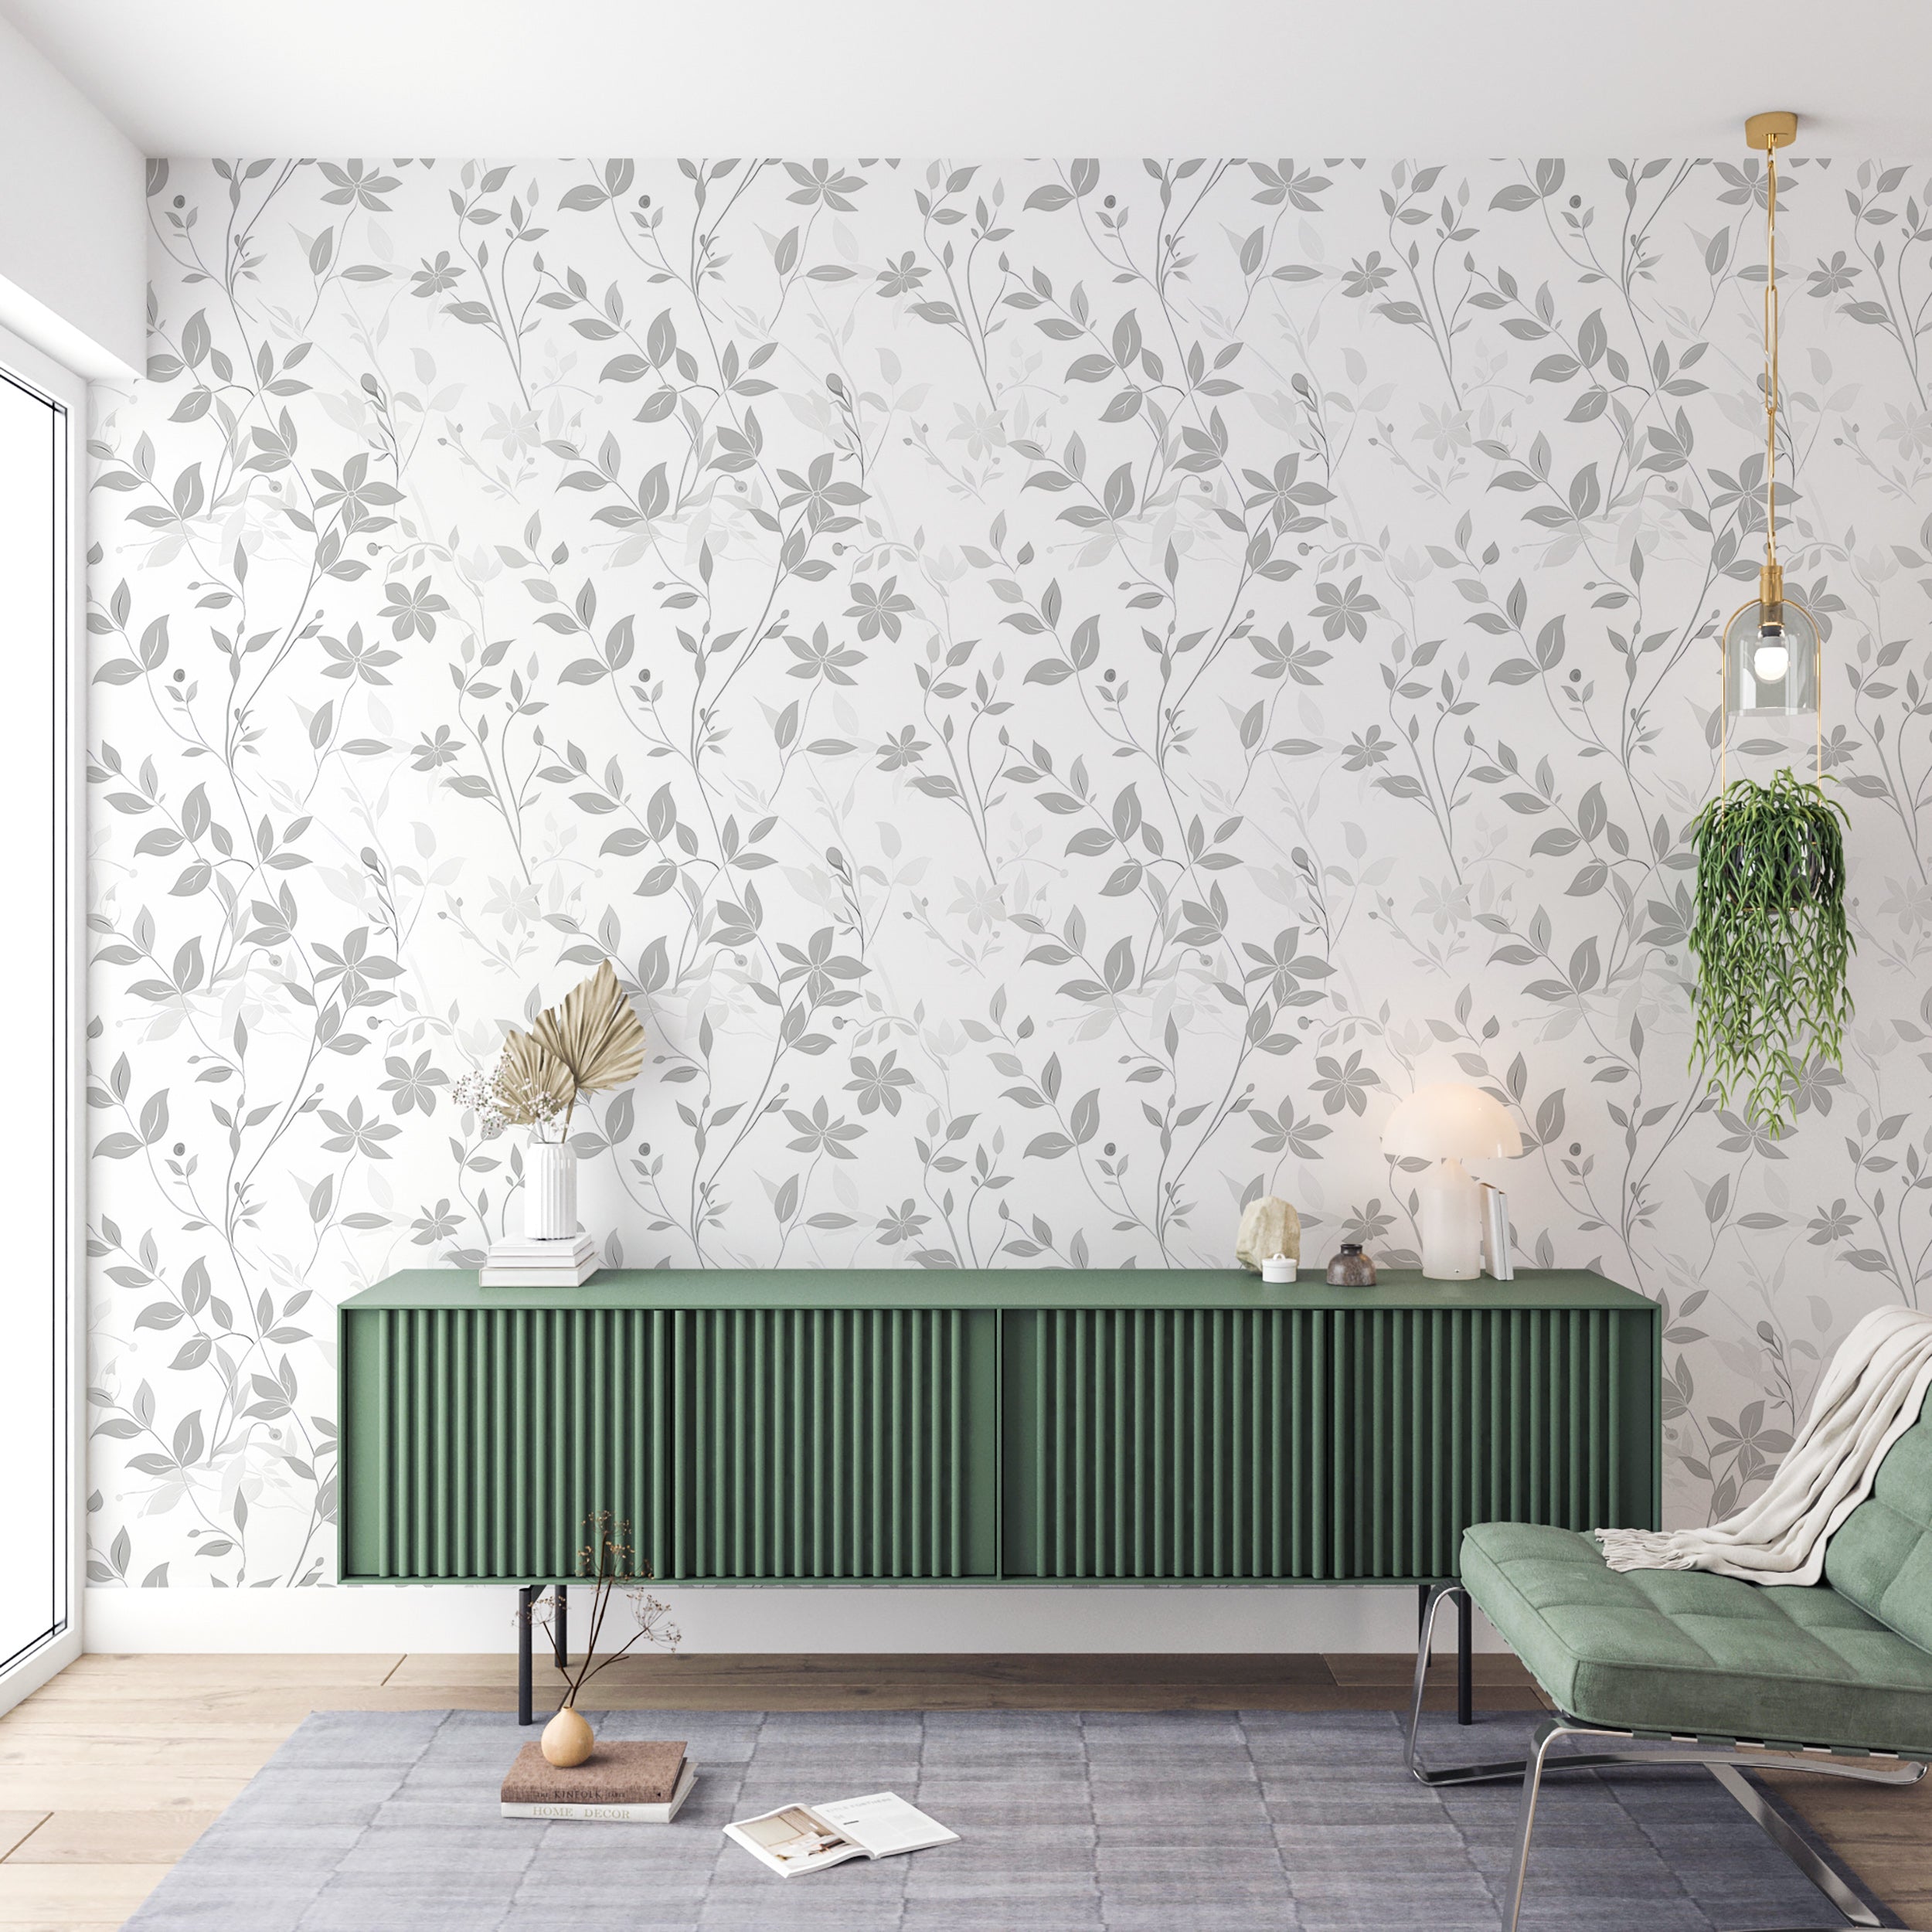 Grey and White Floral Wallpaper, Removable Light Botanical Leaves, Peel and Stick Delicate Tree Flowers Decal, Soft Shades of Grey Floral Pattern